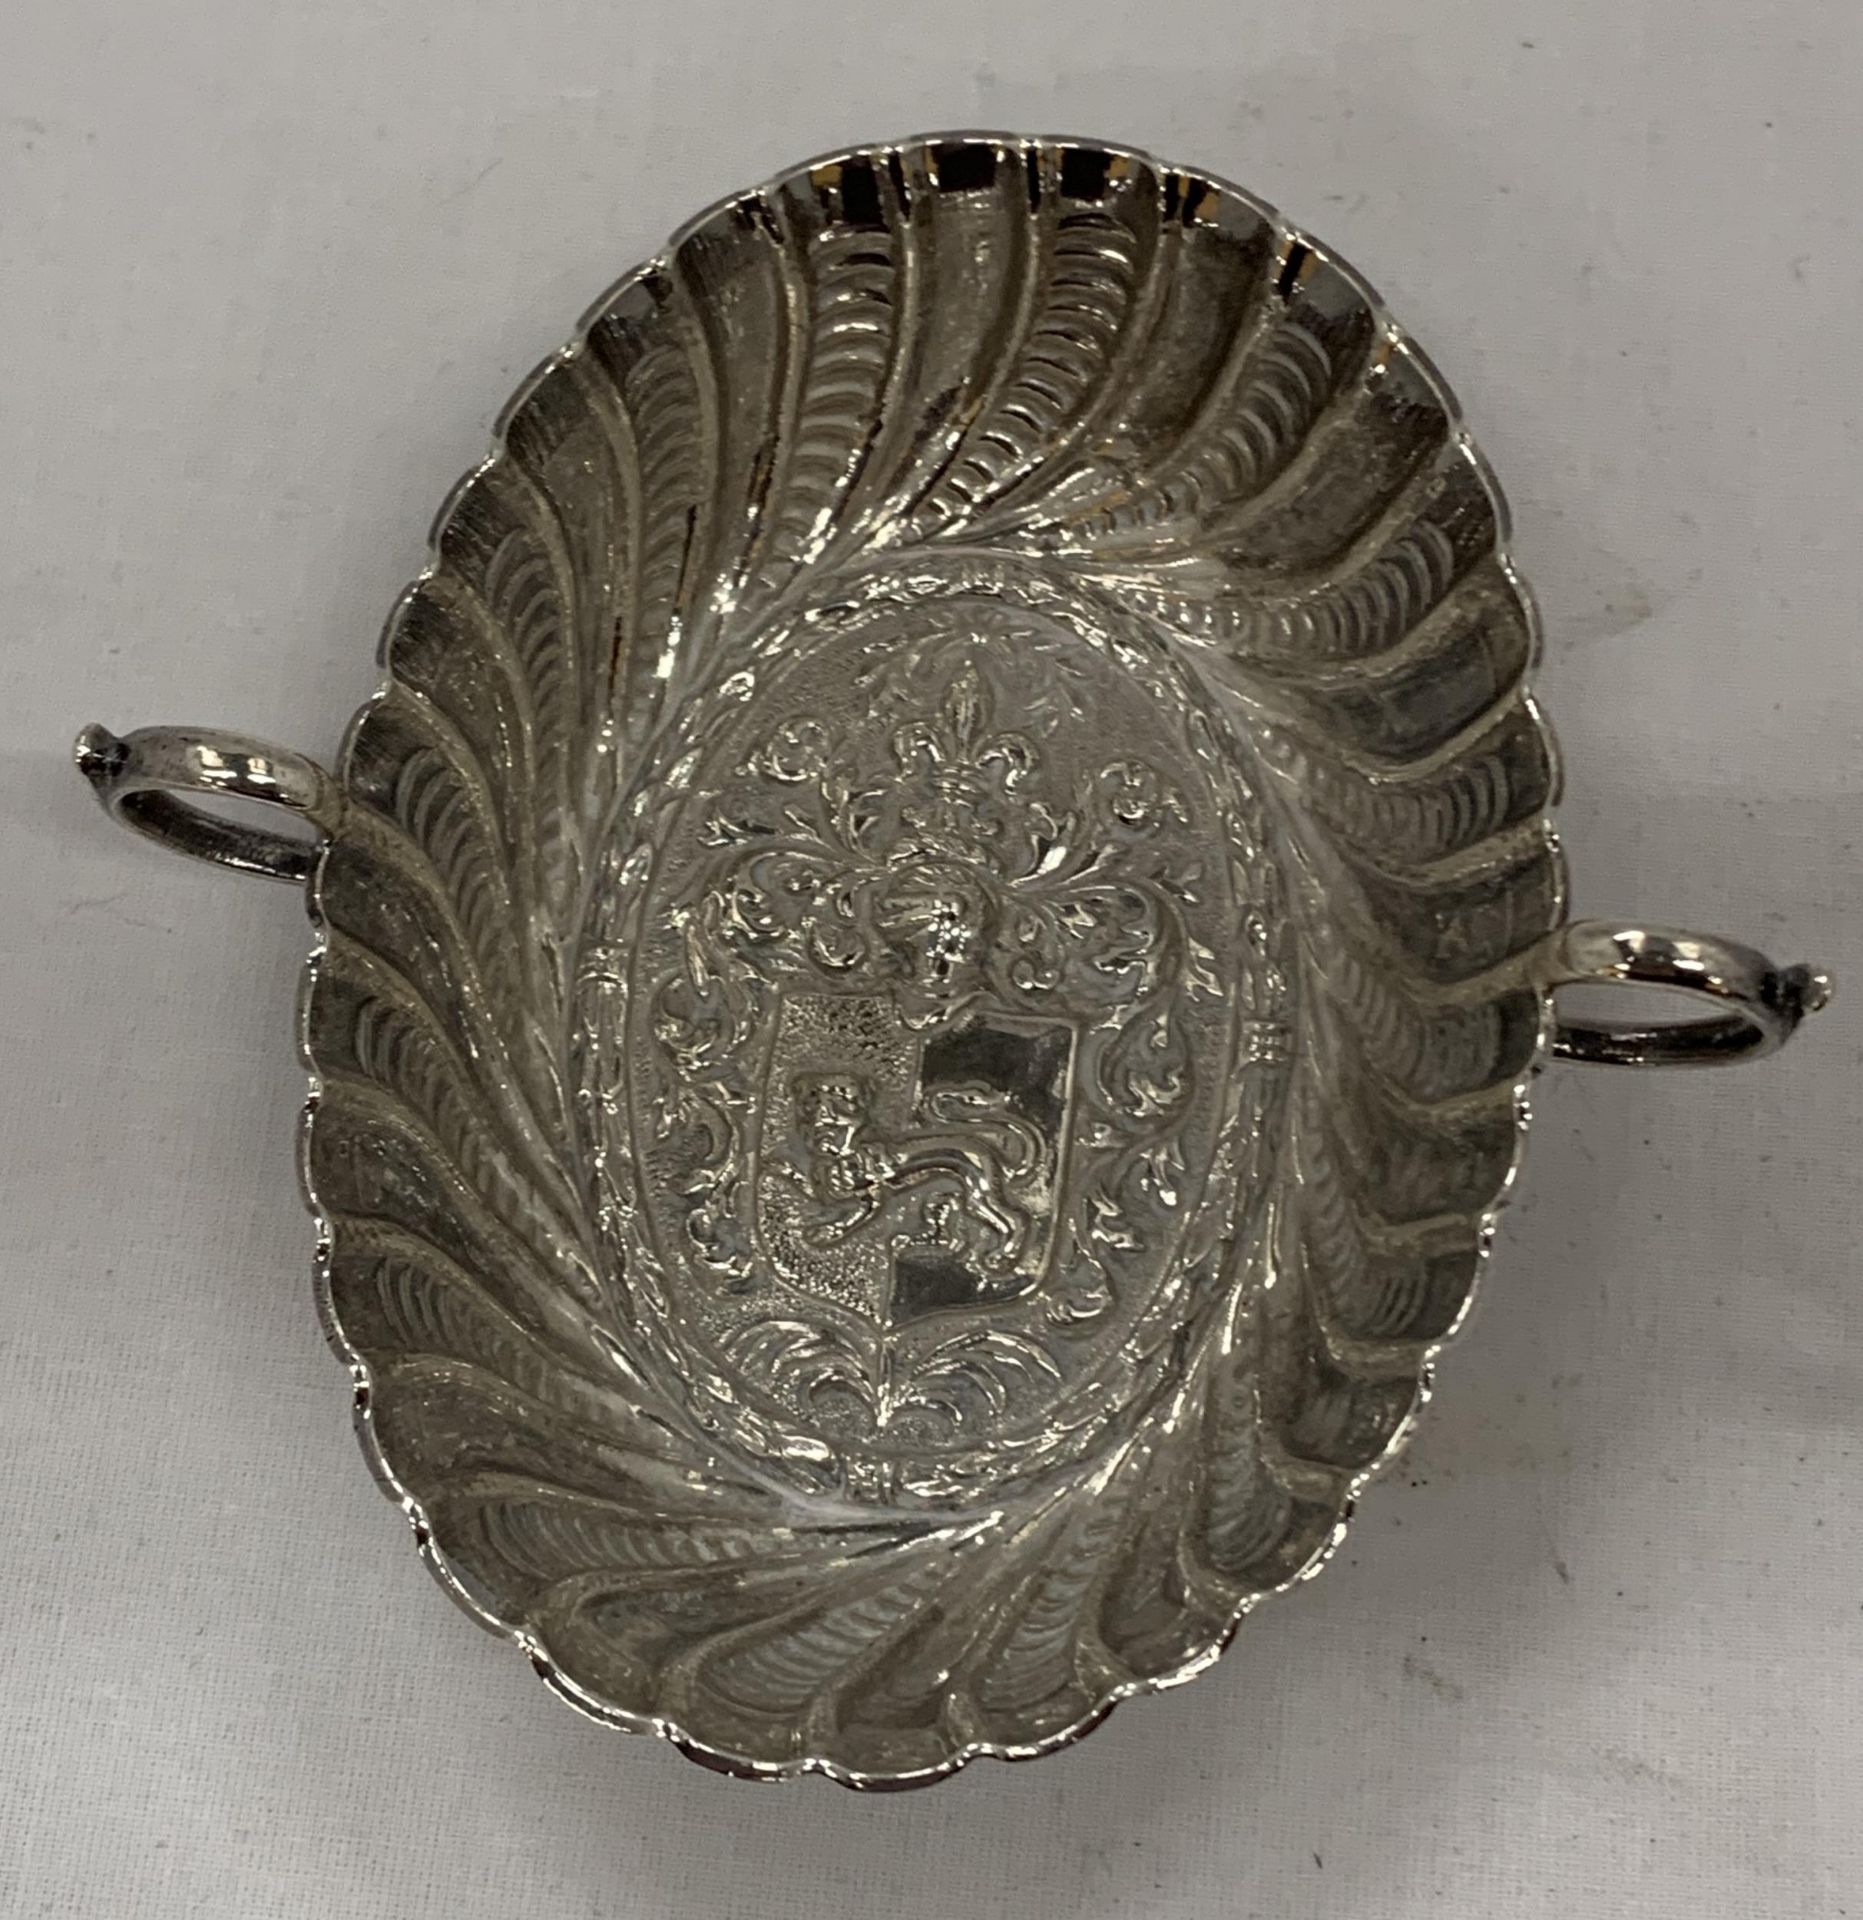 A TWIN HANDLED SILVER BOWL WITH COAT OF ARMS DESIGN